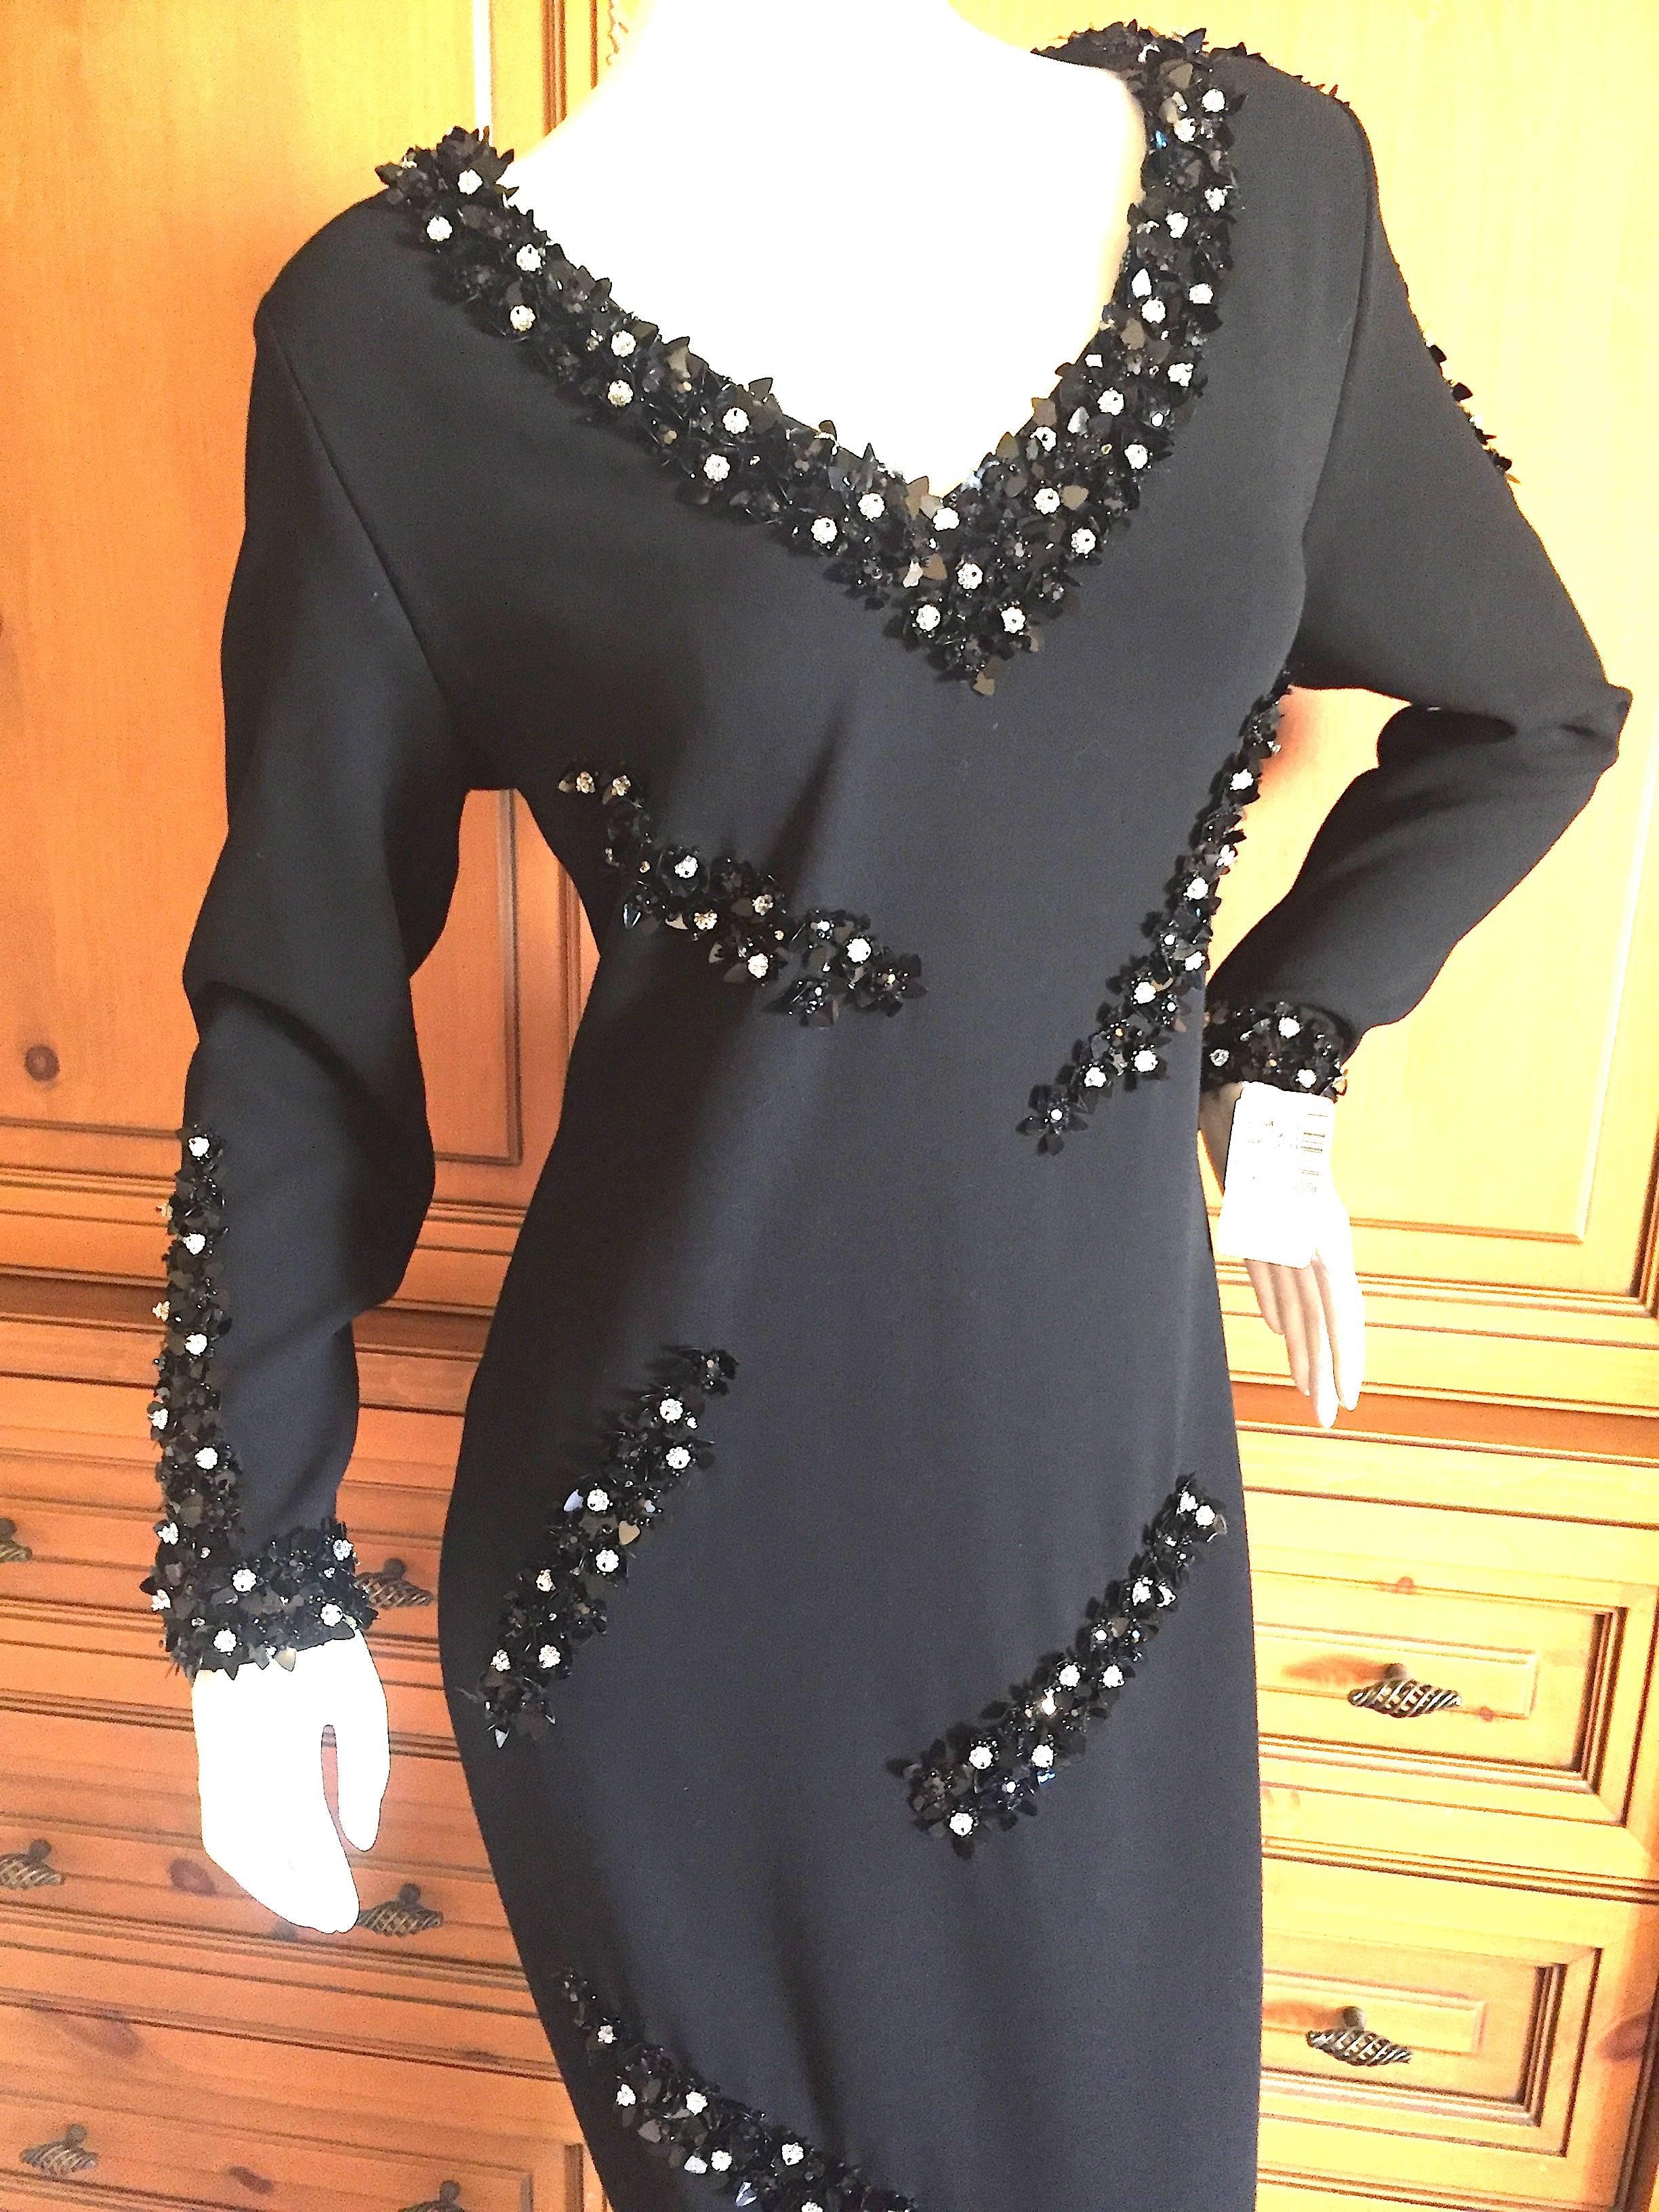 Beautiful black evening dress from James Galanos with black sequins and Swarovski crystal accents through out.
Back zipper, lined in silk.
Size 10
Bust 40